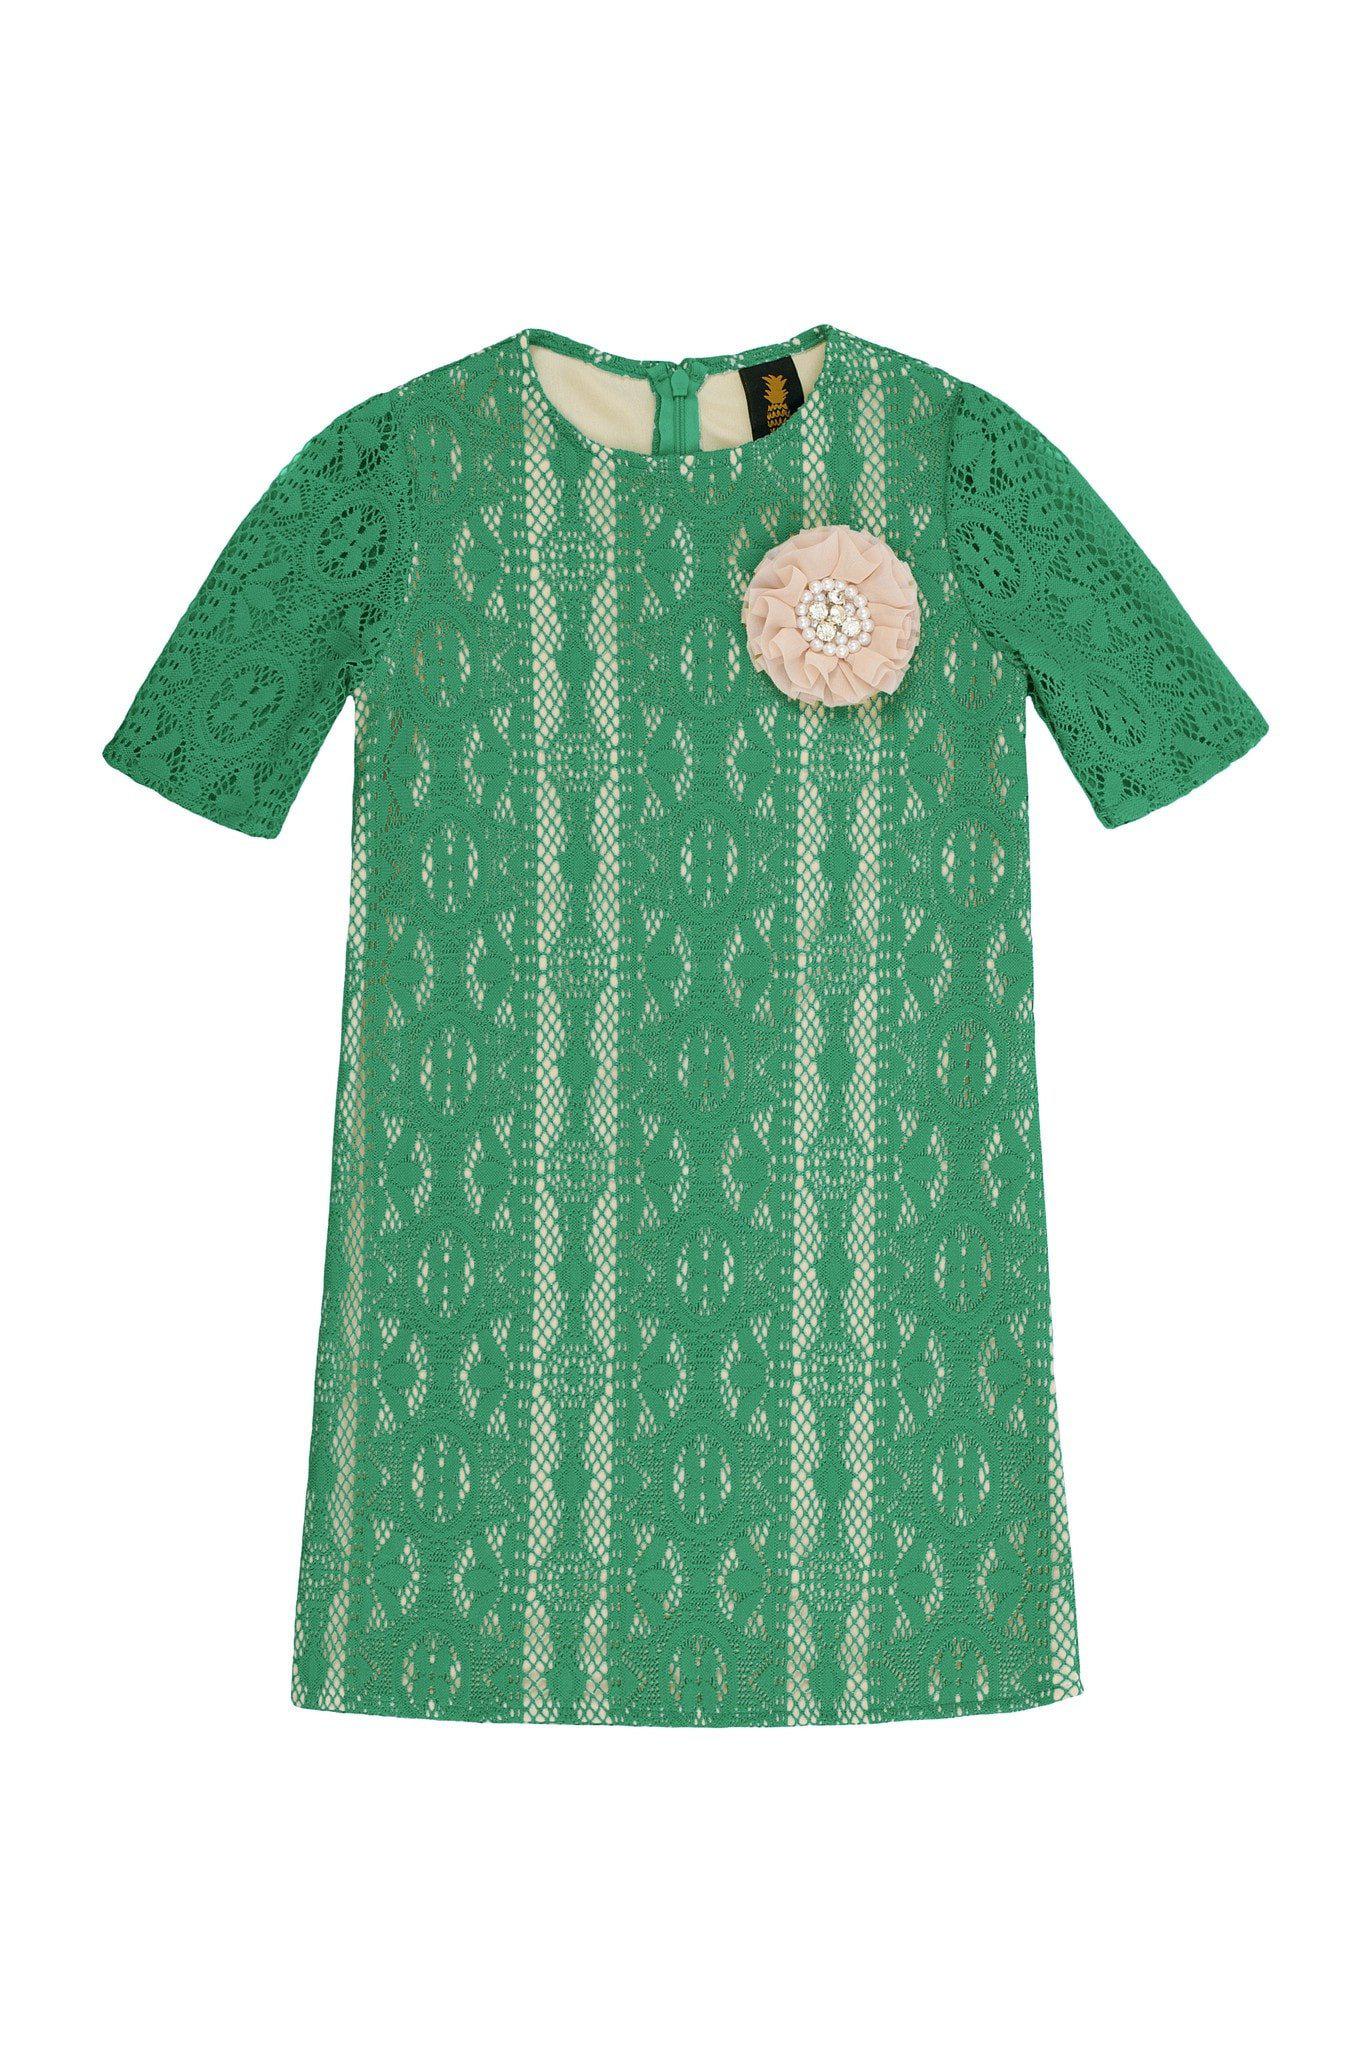 Turquoise Green Crochet Lace Elbow Sleeve Cute Party Summer Dress Girl - Pineapple Clothing